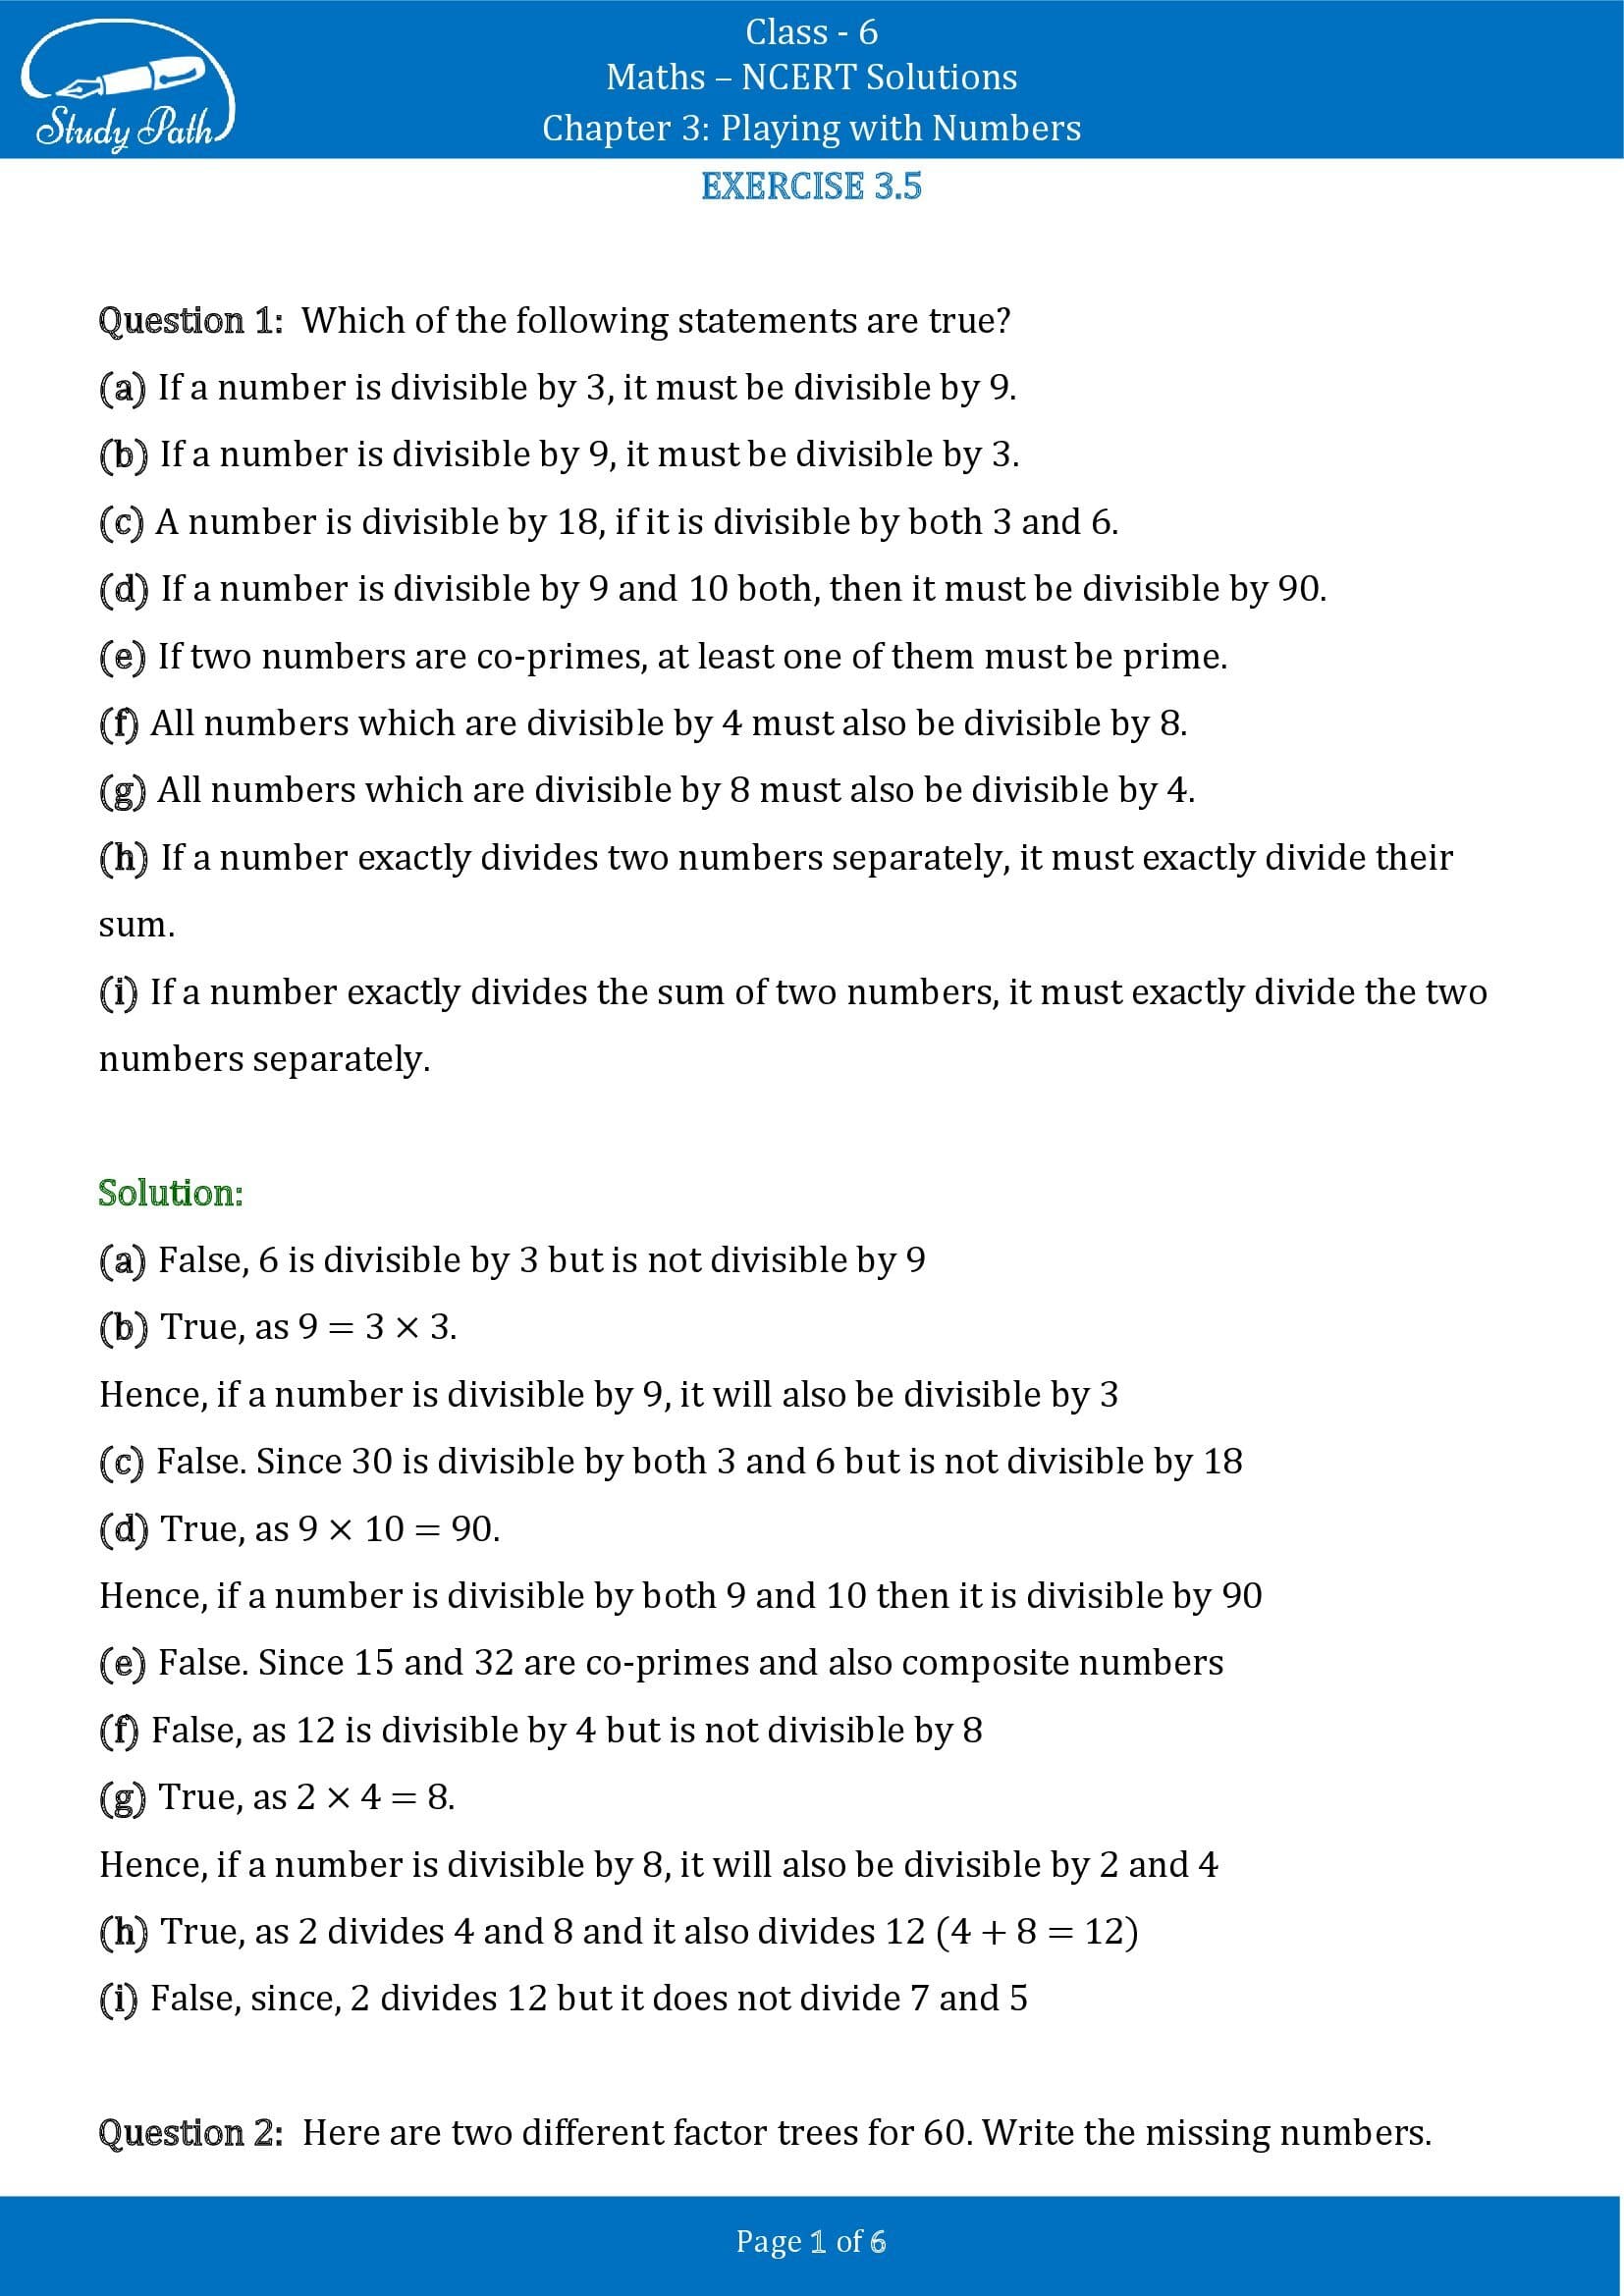 NCERT Solutions for Class 6 Maths Chapter 3 Playing with Numbers Exercise 3.5 00001